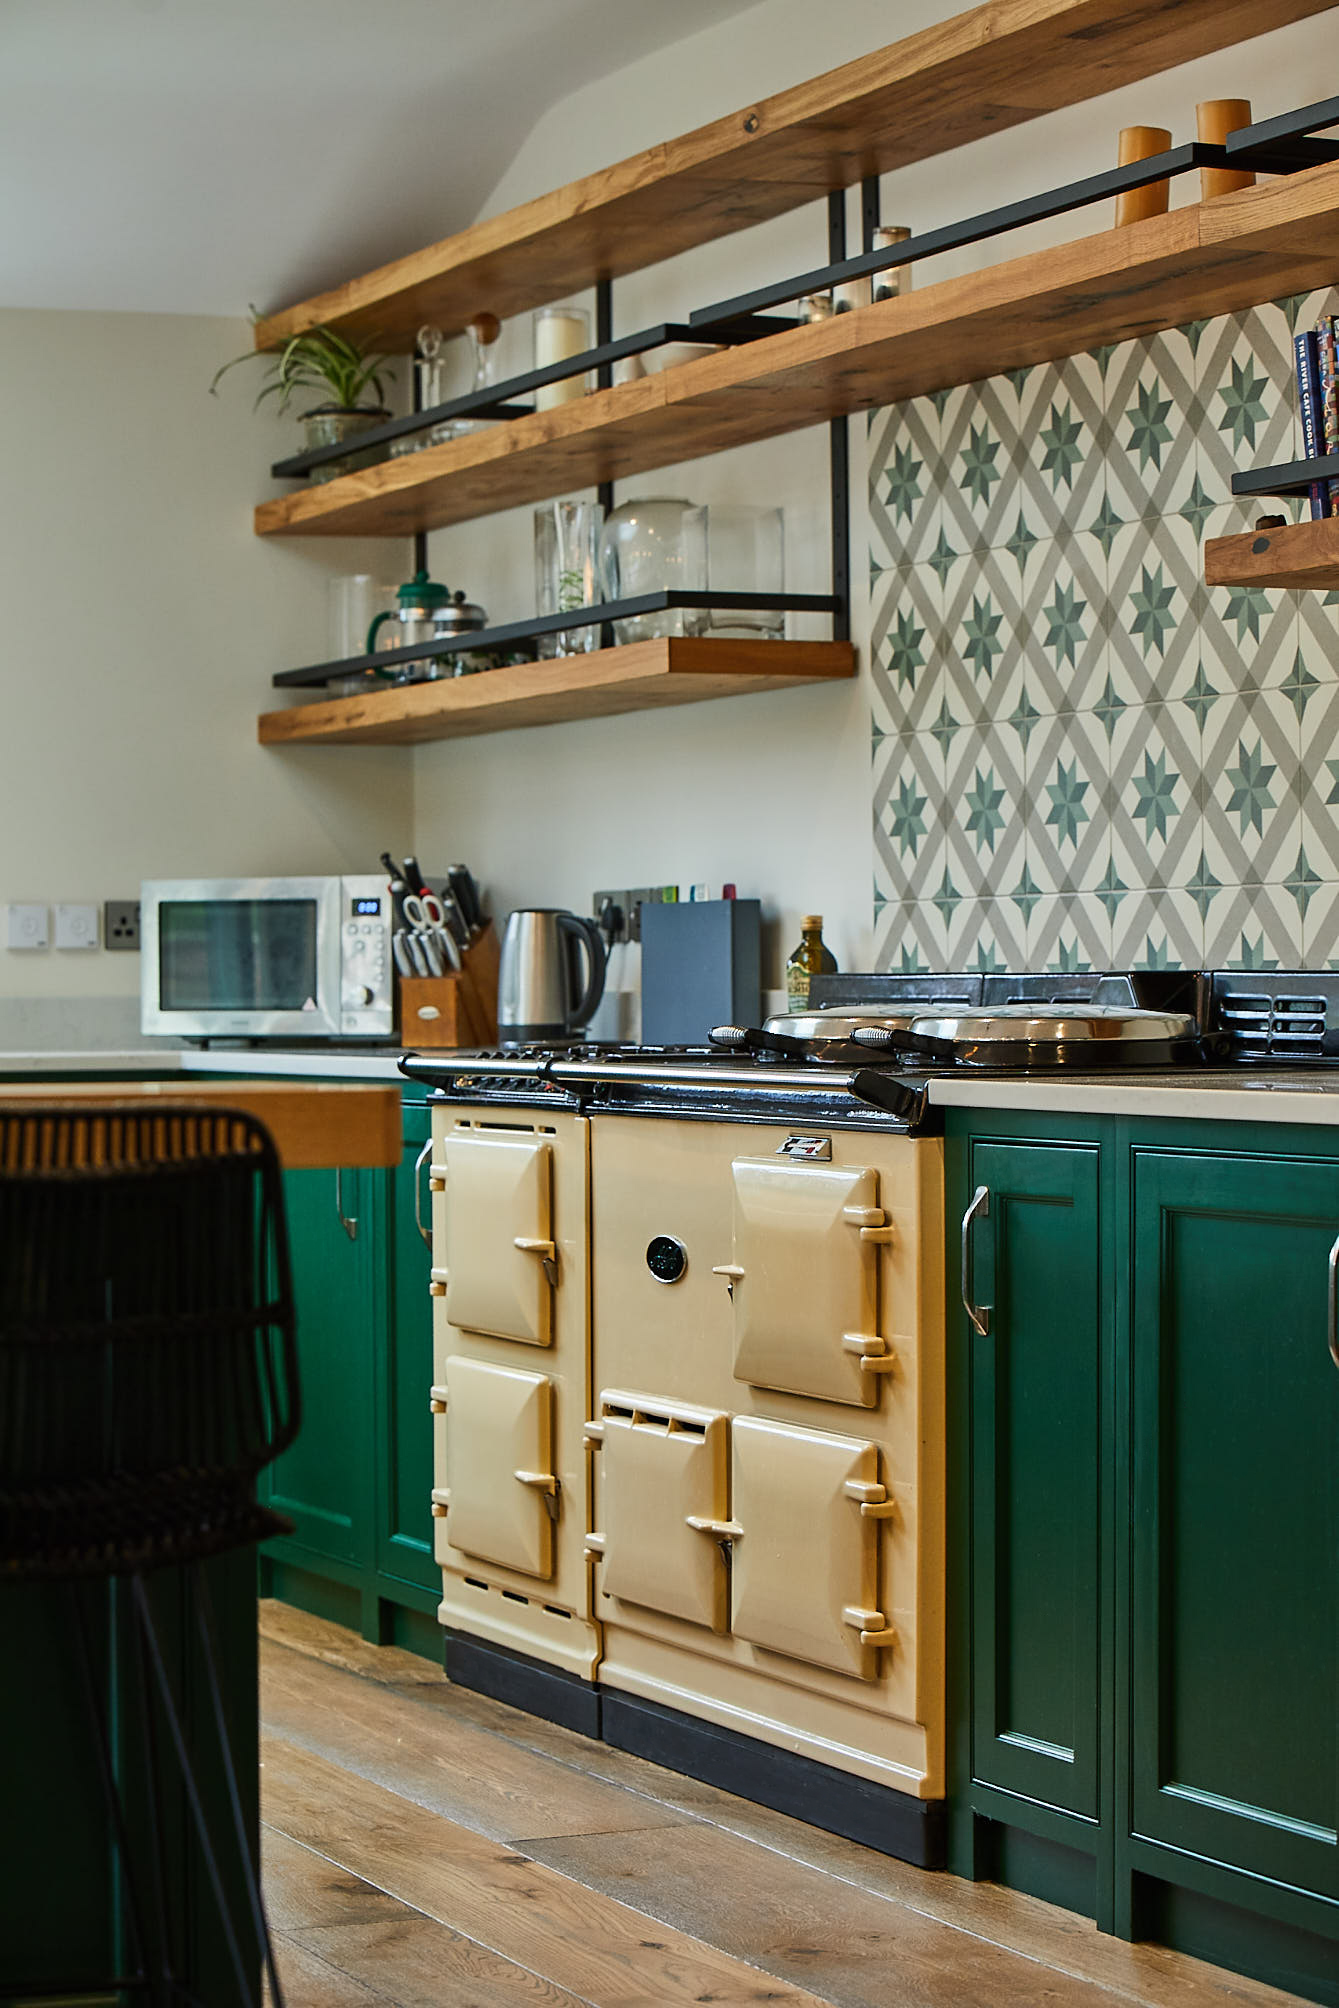 Cream AGA in bespoke kitchen with green shaker cabinets painted in Little Greene paint